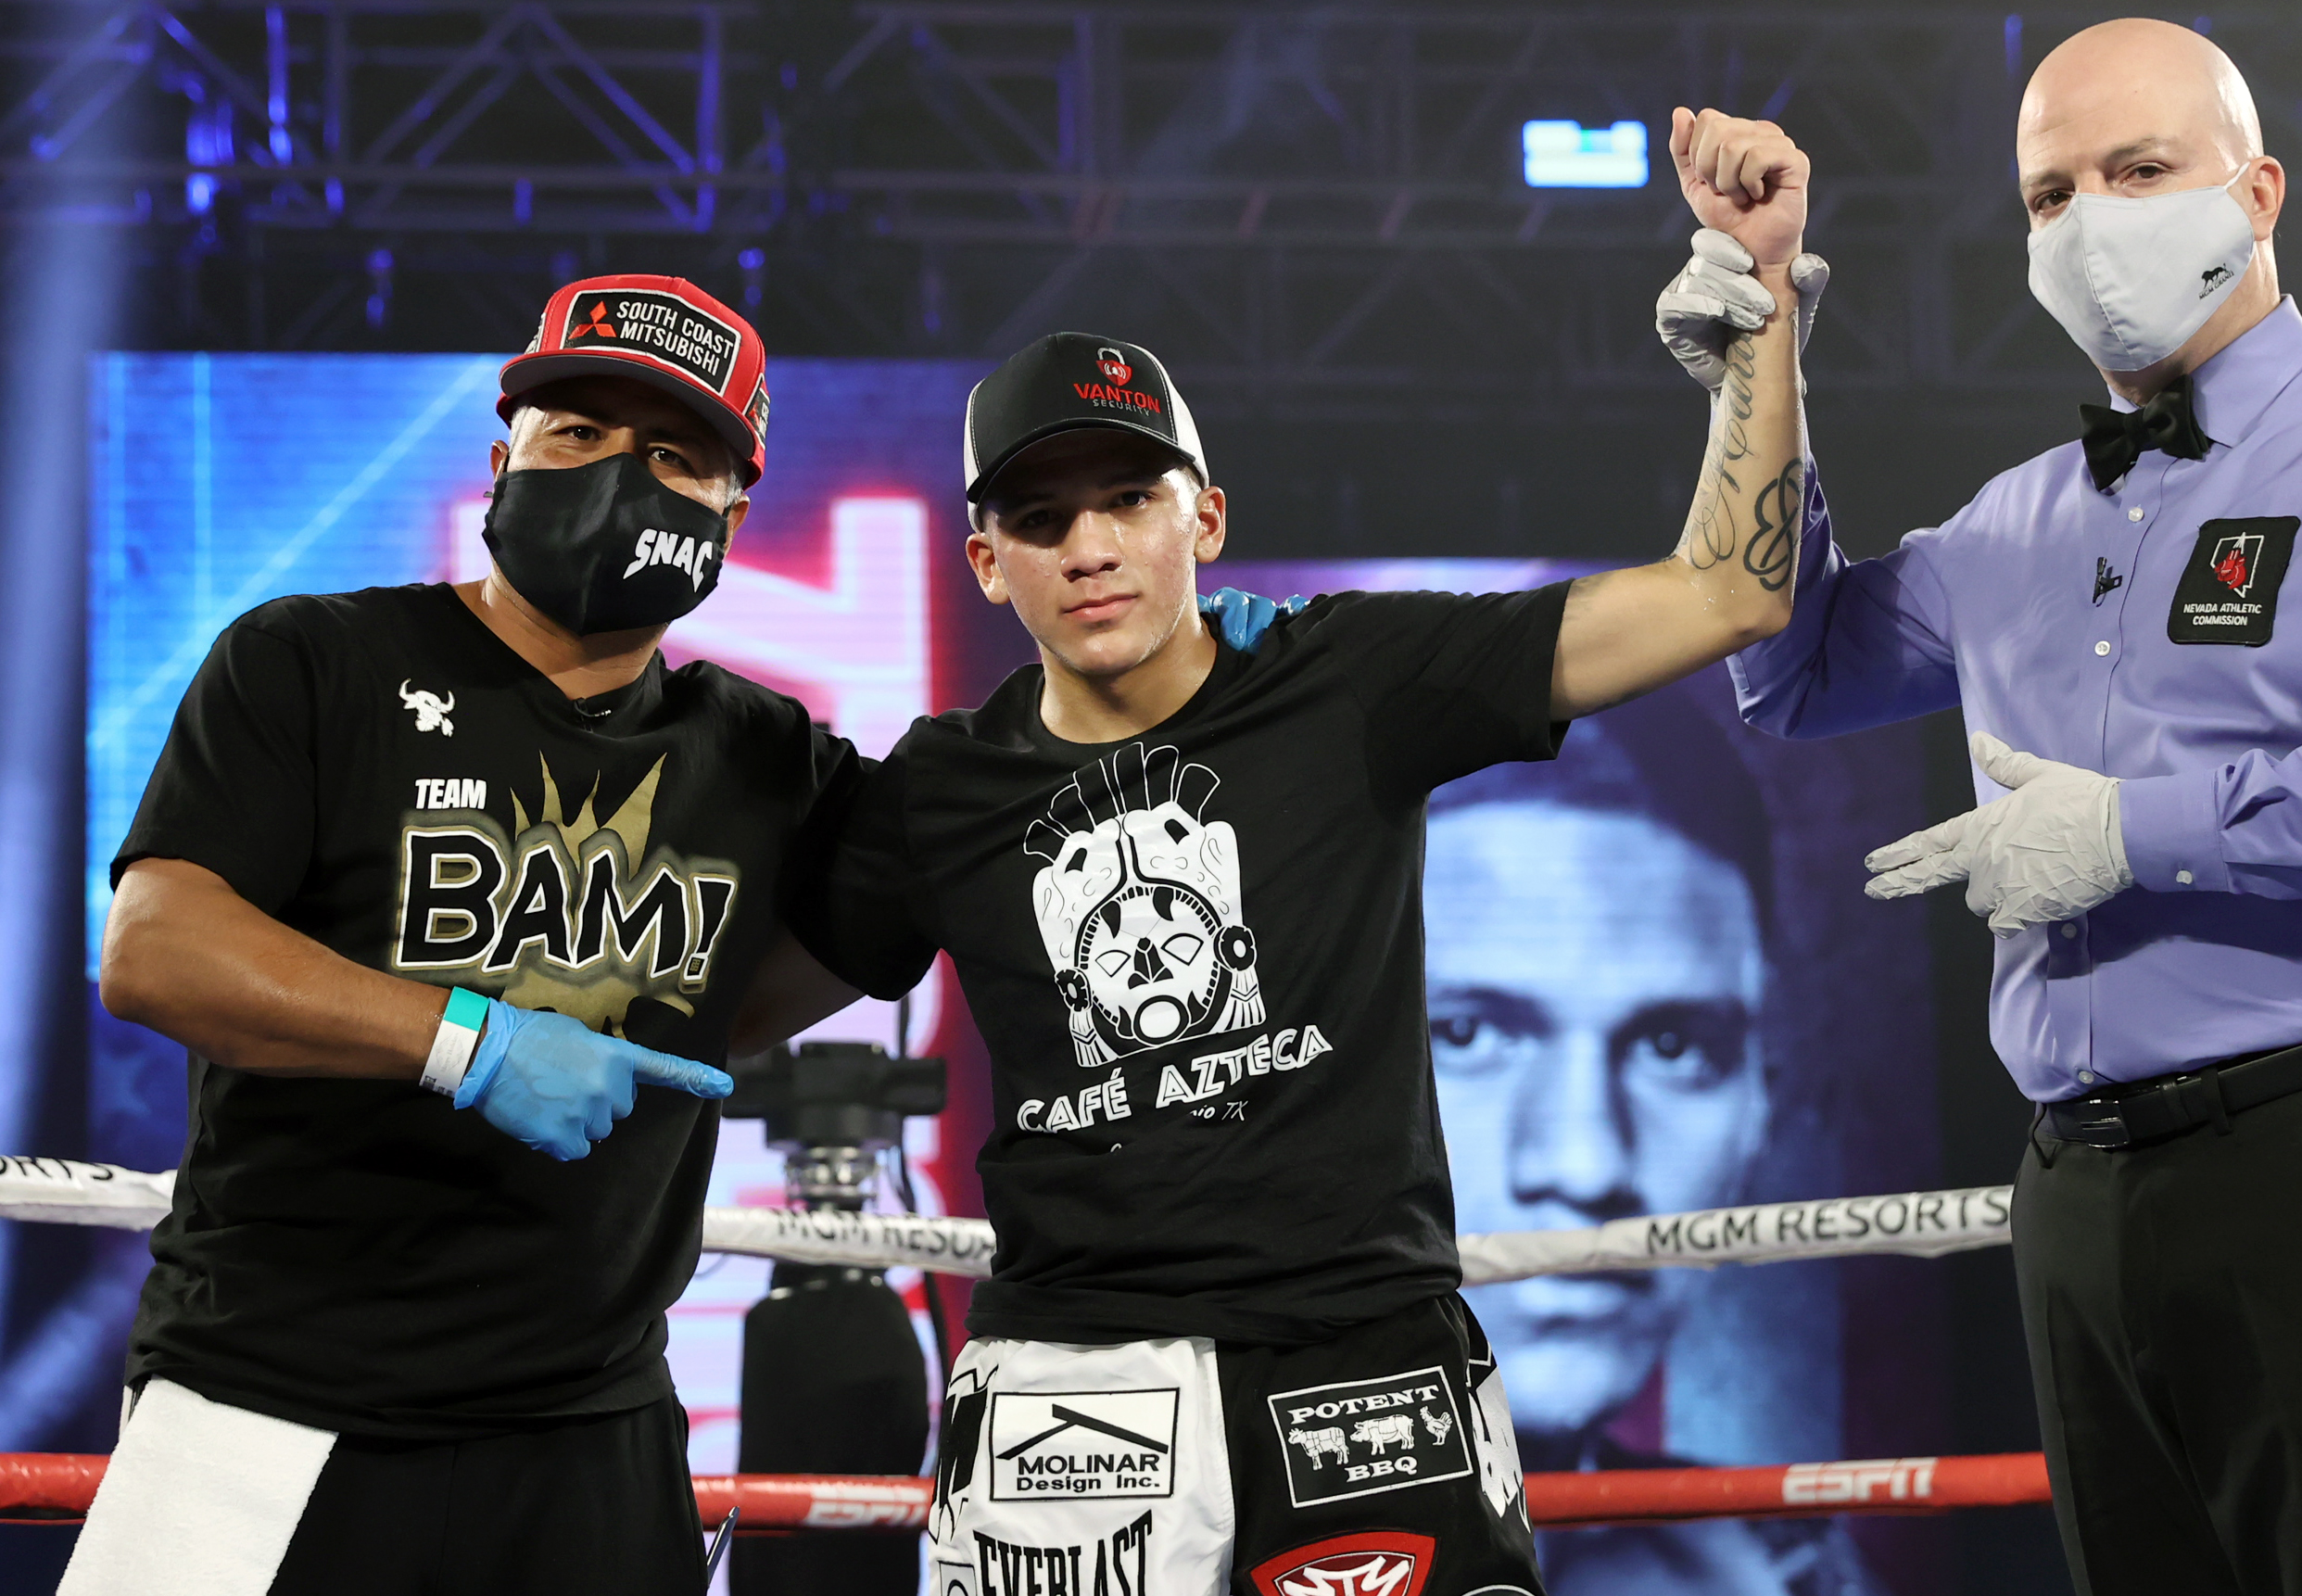 Jesse Rodriguez celebrates after defeating Saul Juarez at the MGM Grand Conference Center on December 12, 2020 in Las Vegas, Nevada.